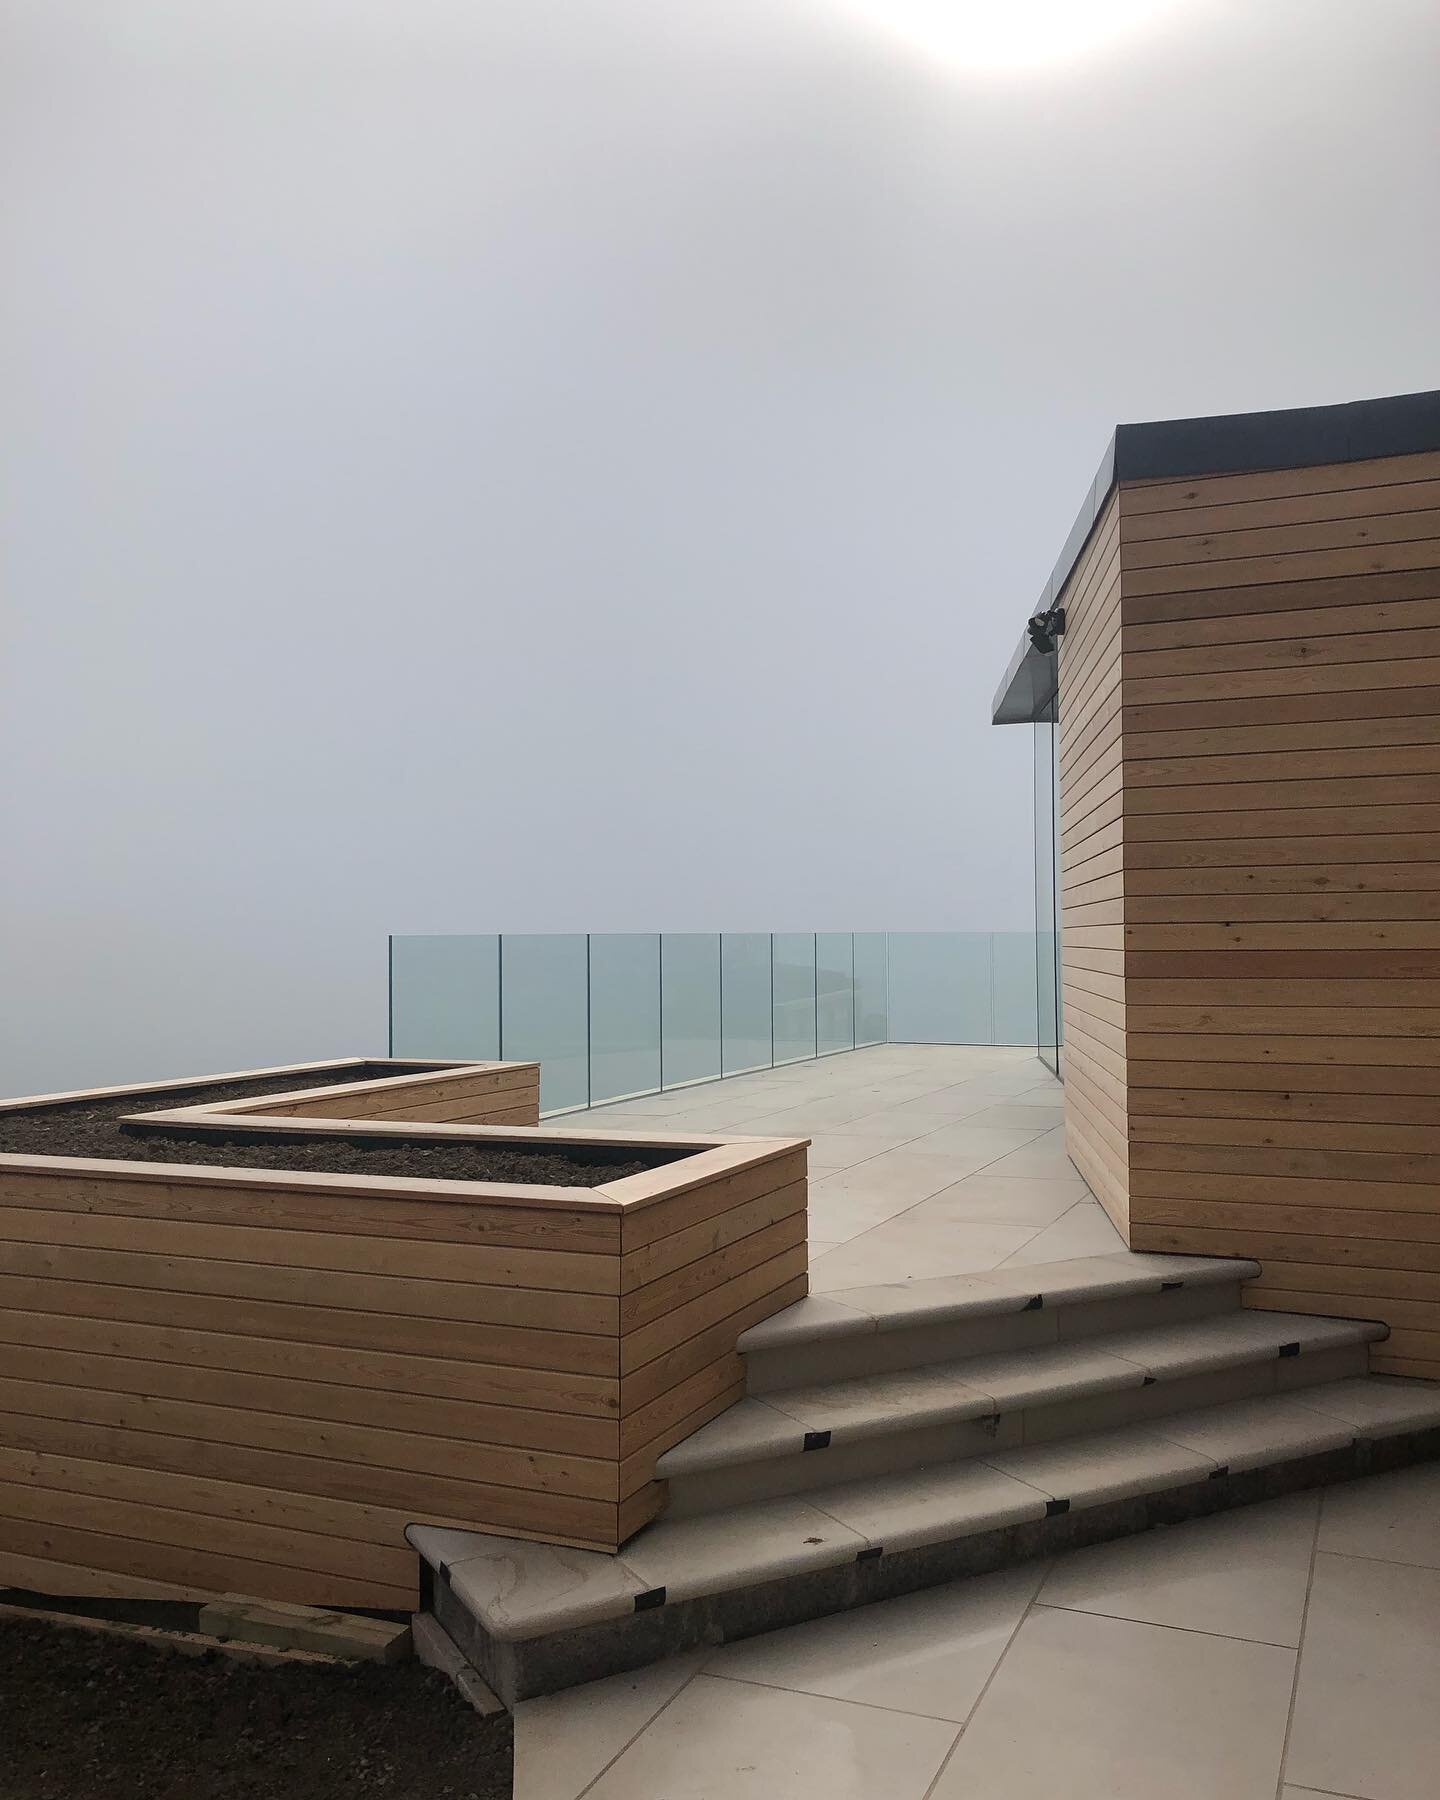 The haar came rolling in so fast, missed a shot of the view! On site at Inverbervie, just the last few bits to finish, balustrade now on and looking good, planter finished and waiting for some new plants. 🌱 
.
.
.

#architect #architecture #designer